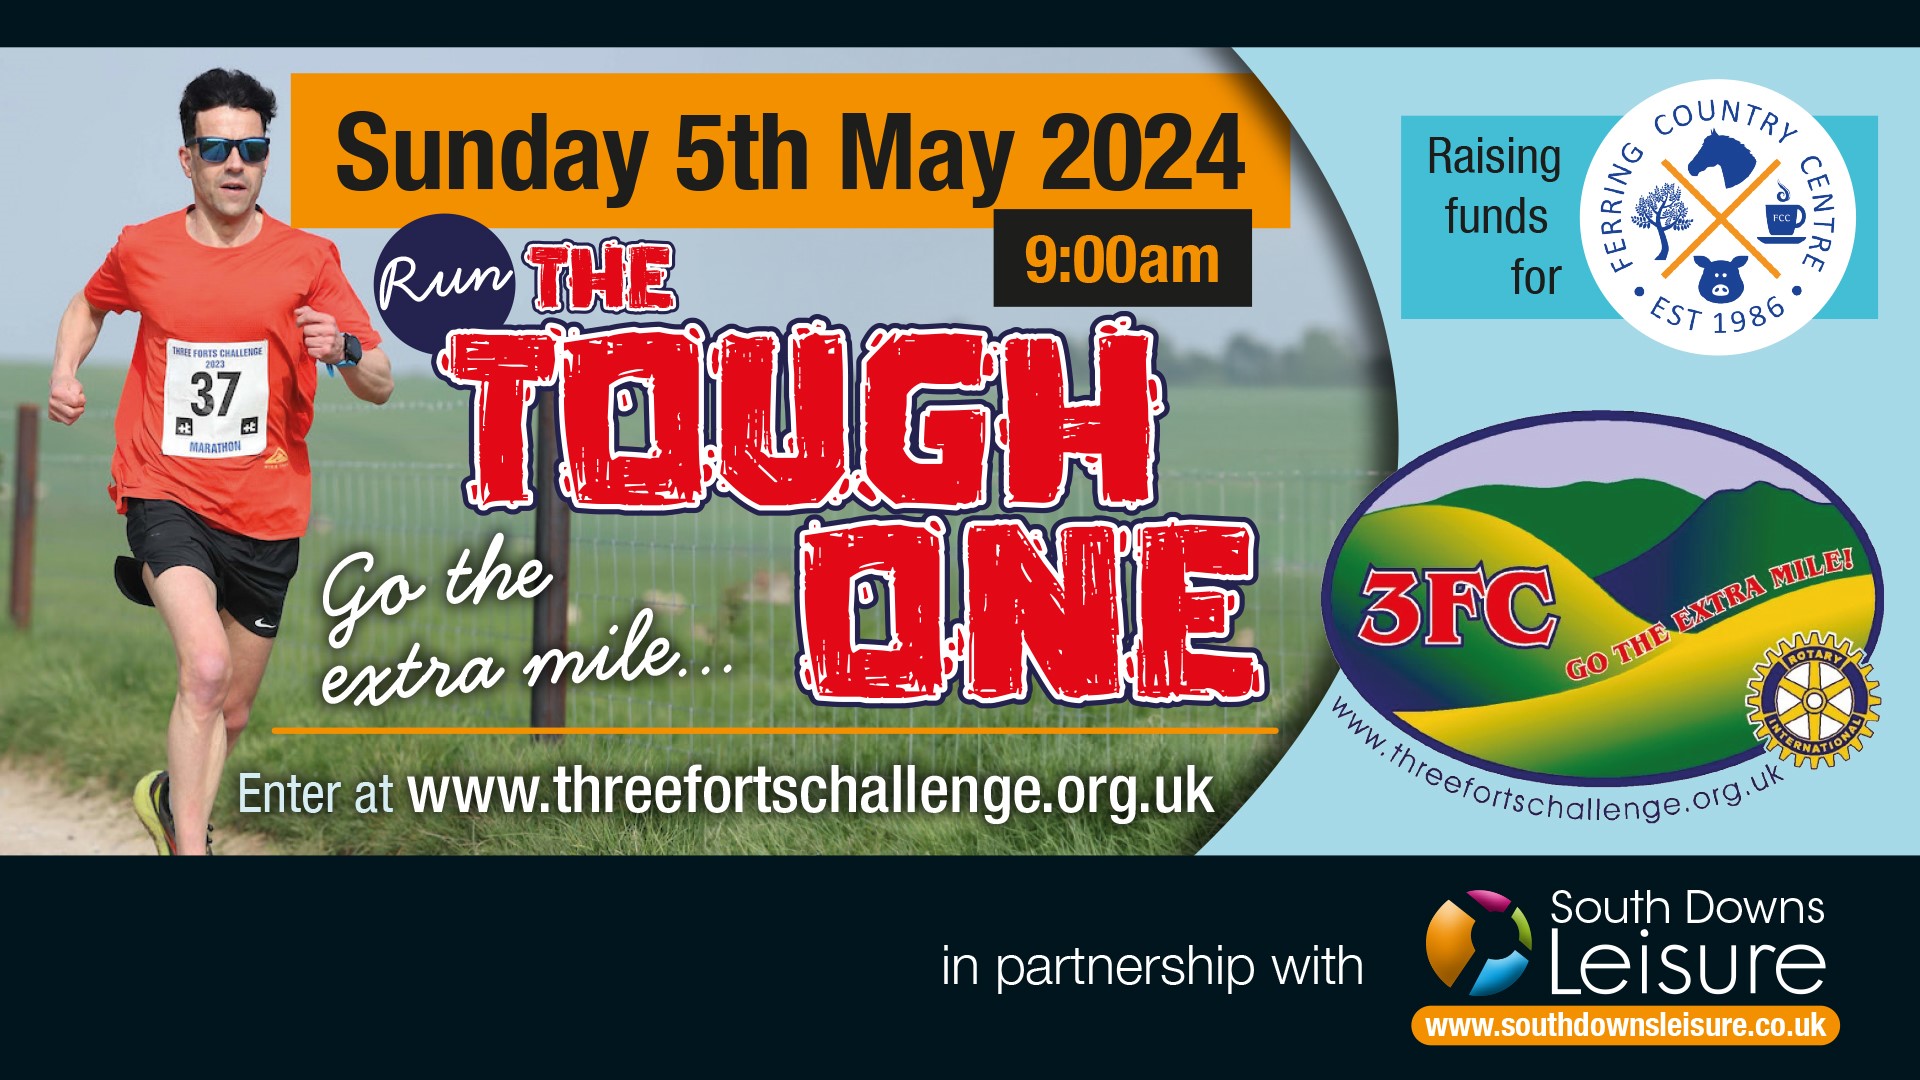 South Downs Leisure to partner with Three Forts Challenge